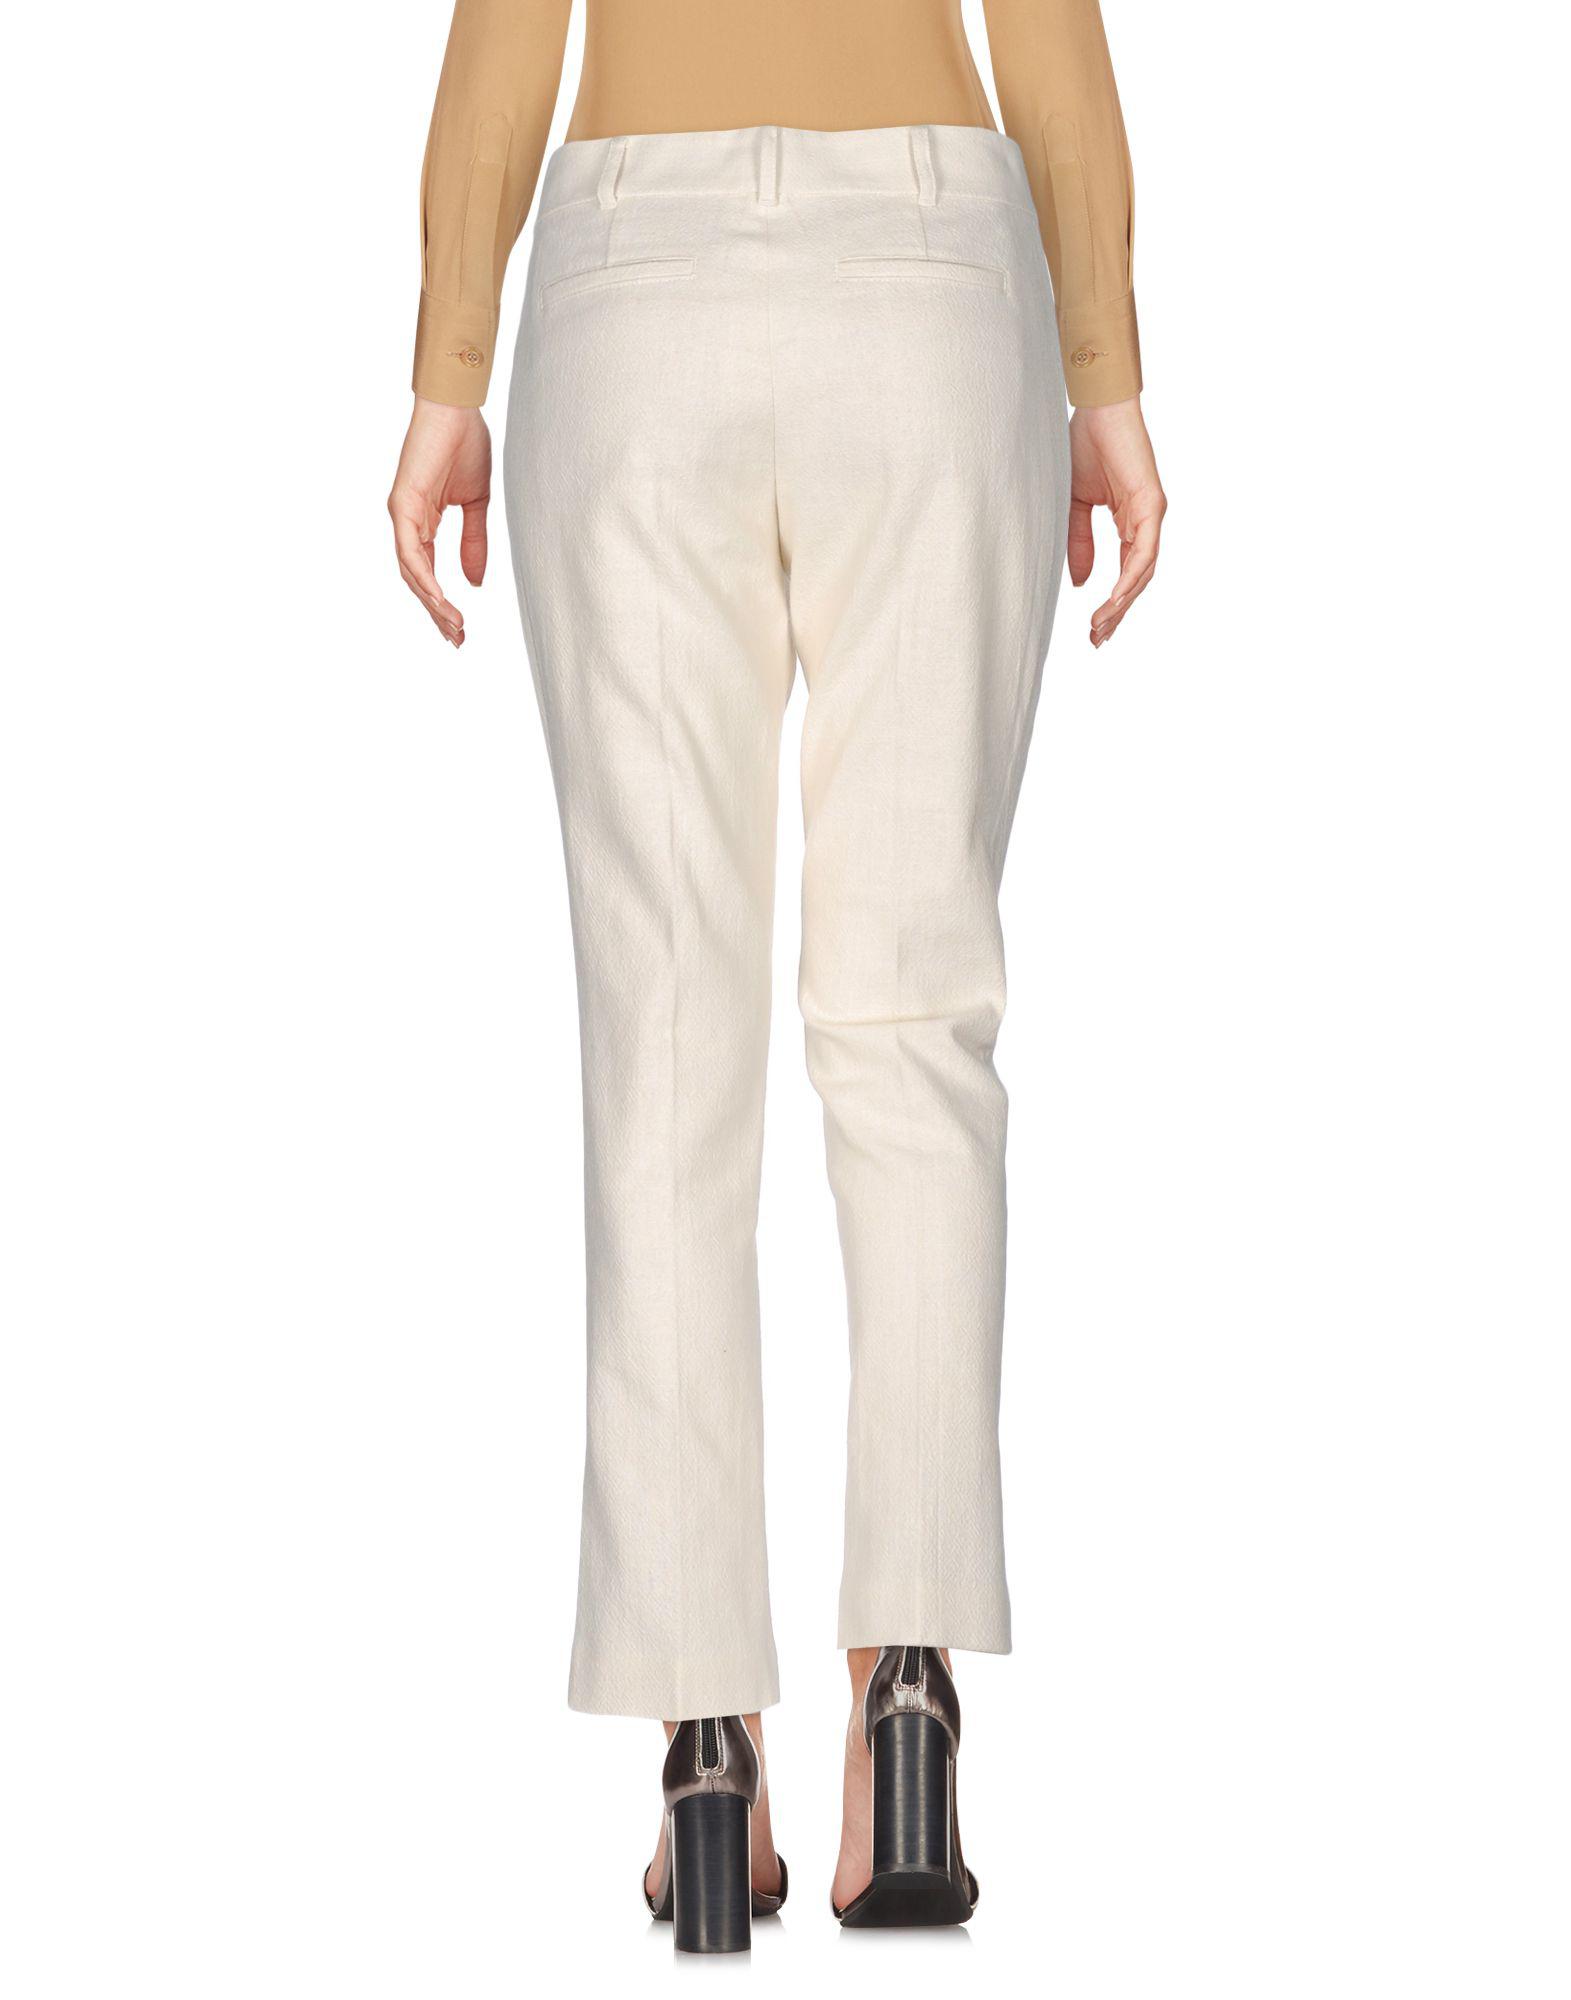 Tory Burch Cotton Casual Pants in Ivory (White) - Lyst